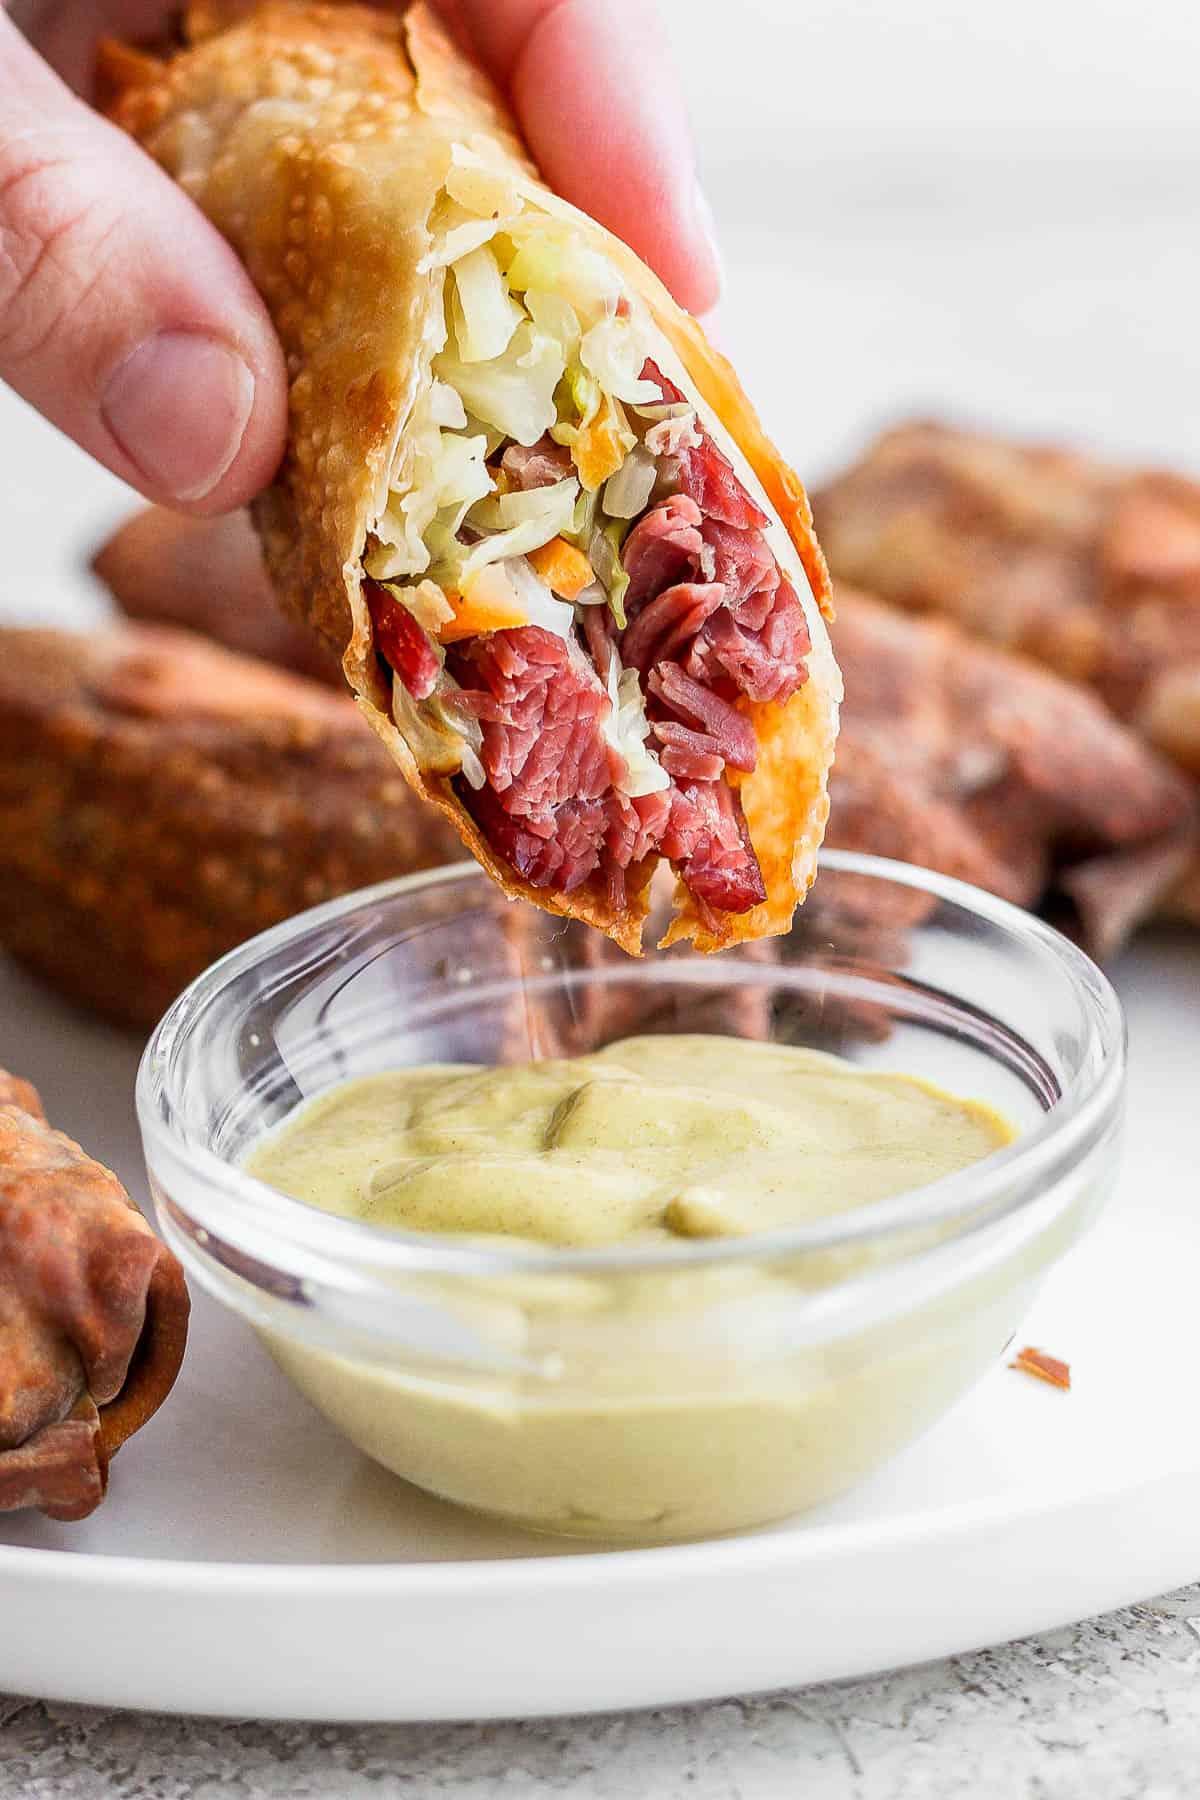 A corned beef and cabbage egg roll being dipped in a small dish of dijon mustard.